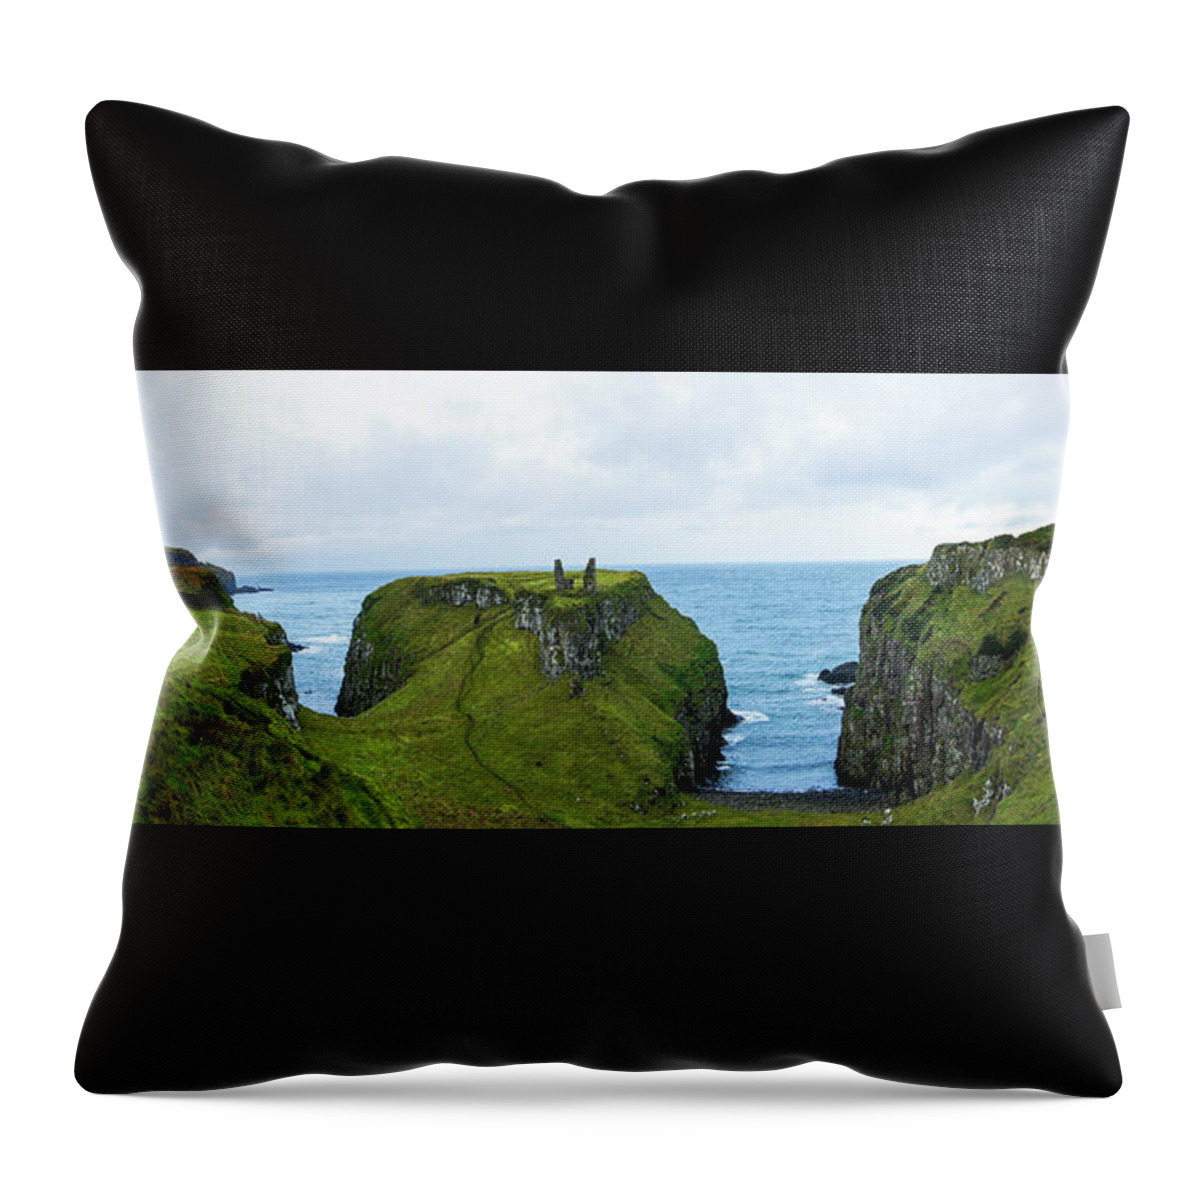 Northern Ireland Coast Throw Pillow featuring the photograph Northern Ireland Coast by Imagery by Charly